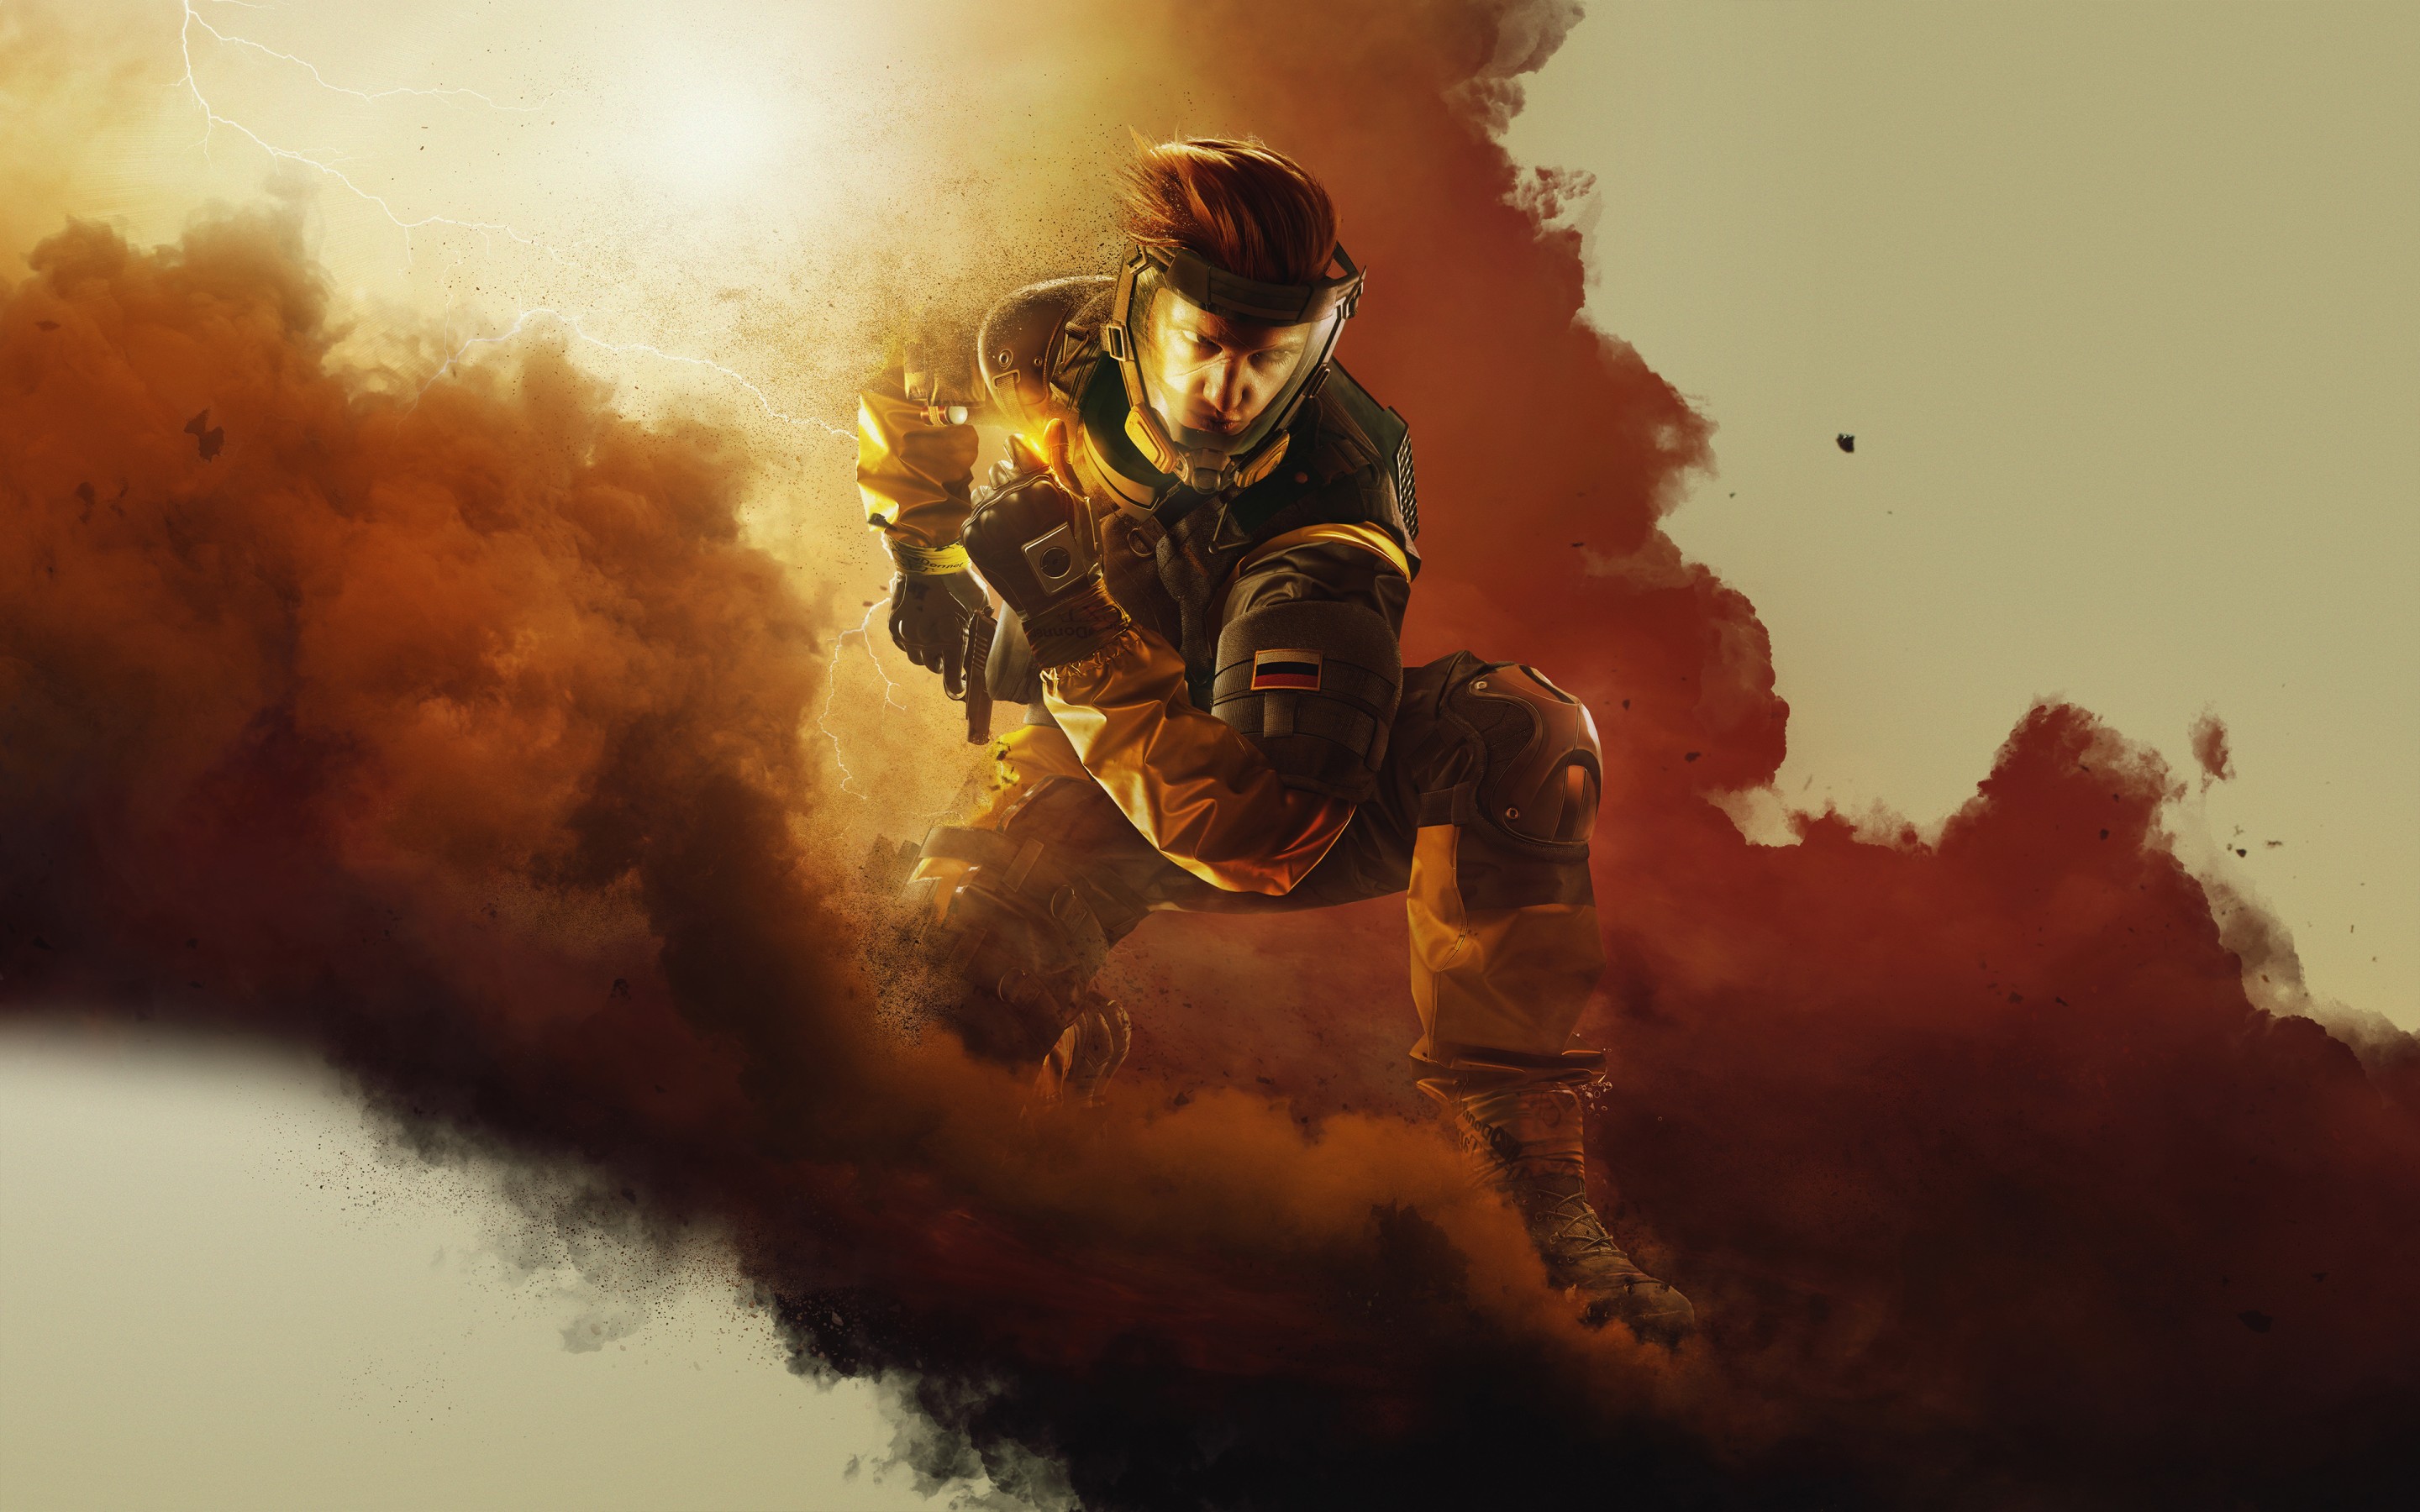 Download Rainbow Six Siege Hd Wallpaper for Desktop and Mobiles